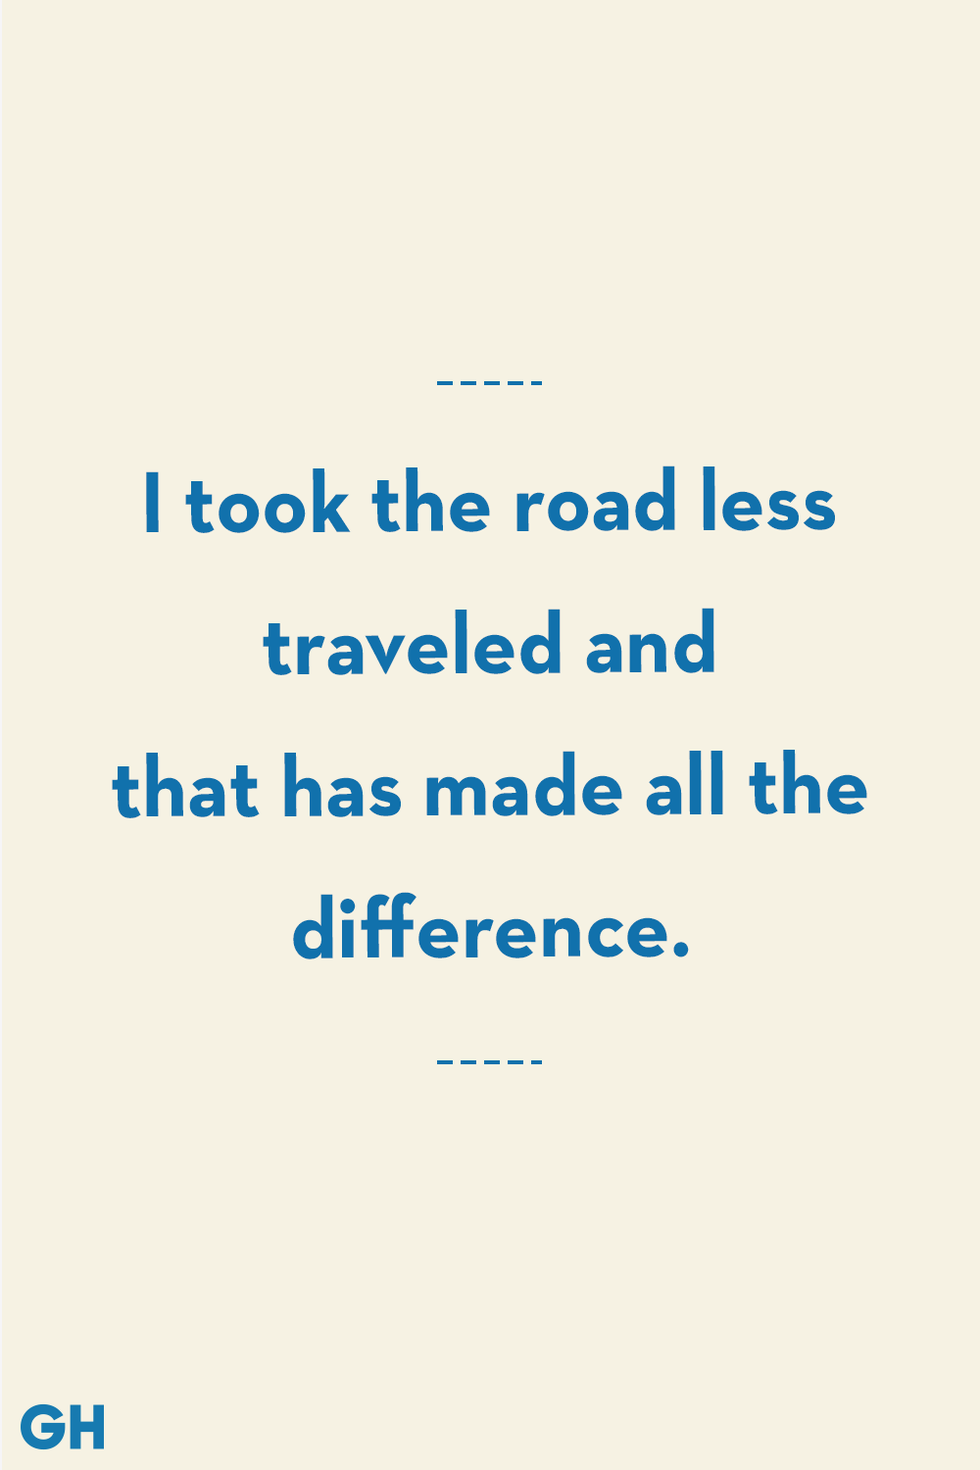 i took the road less traveled and that has made all the difference